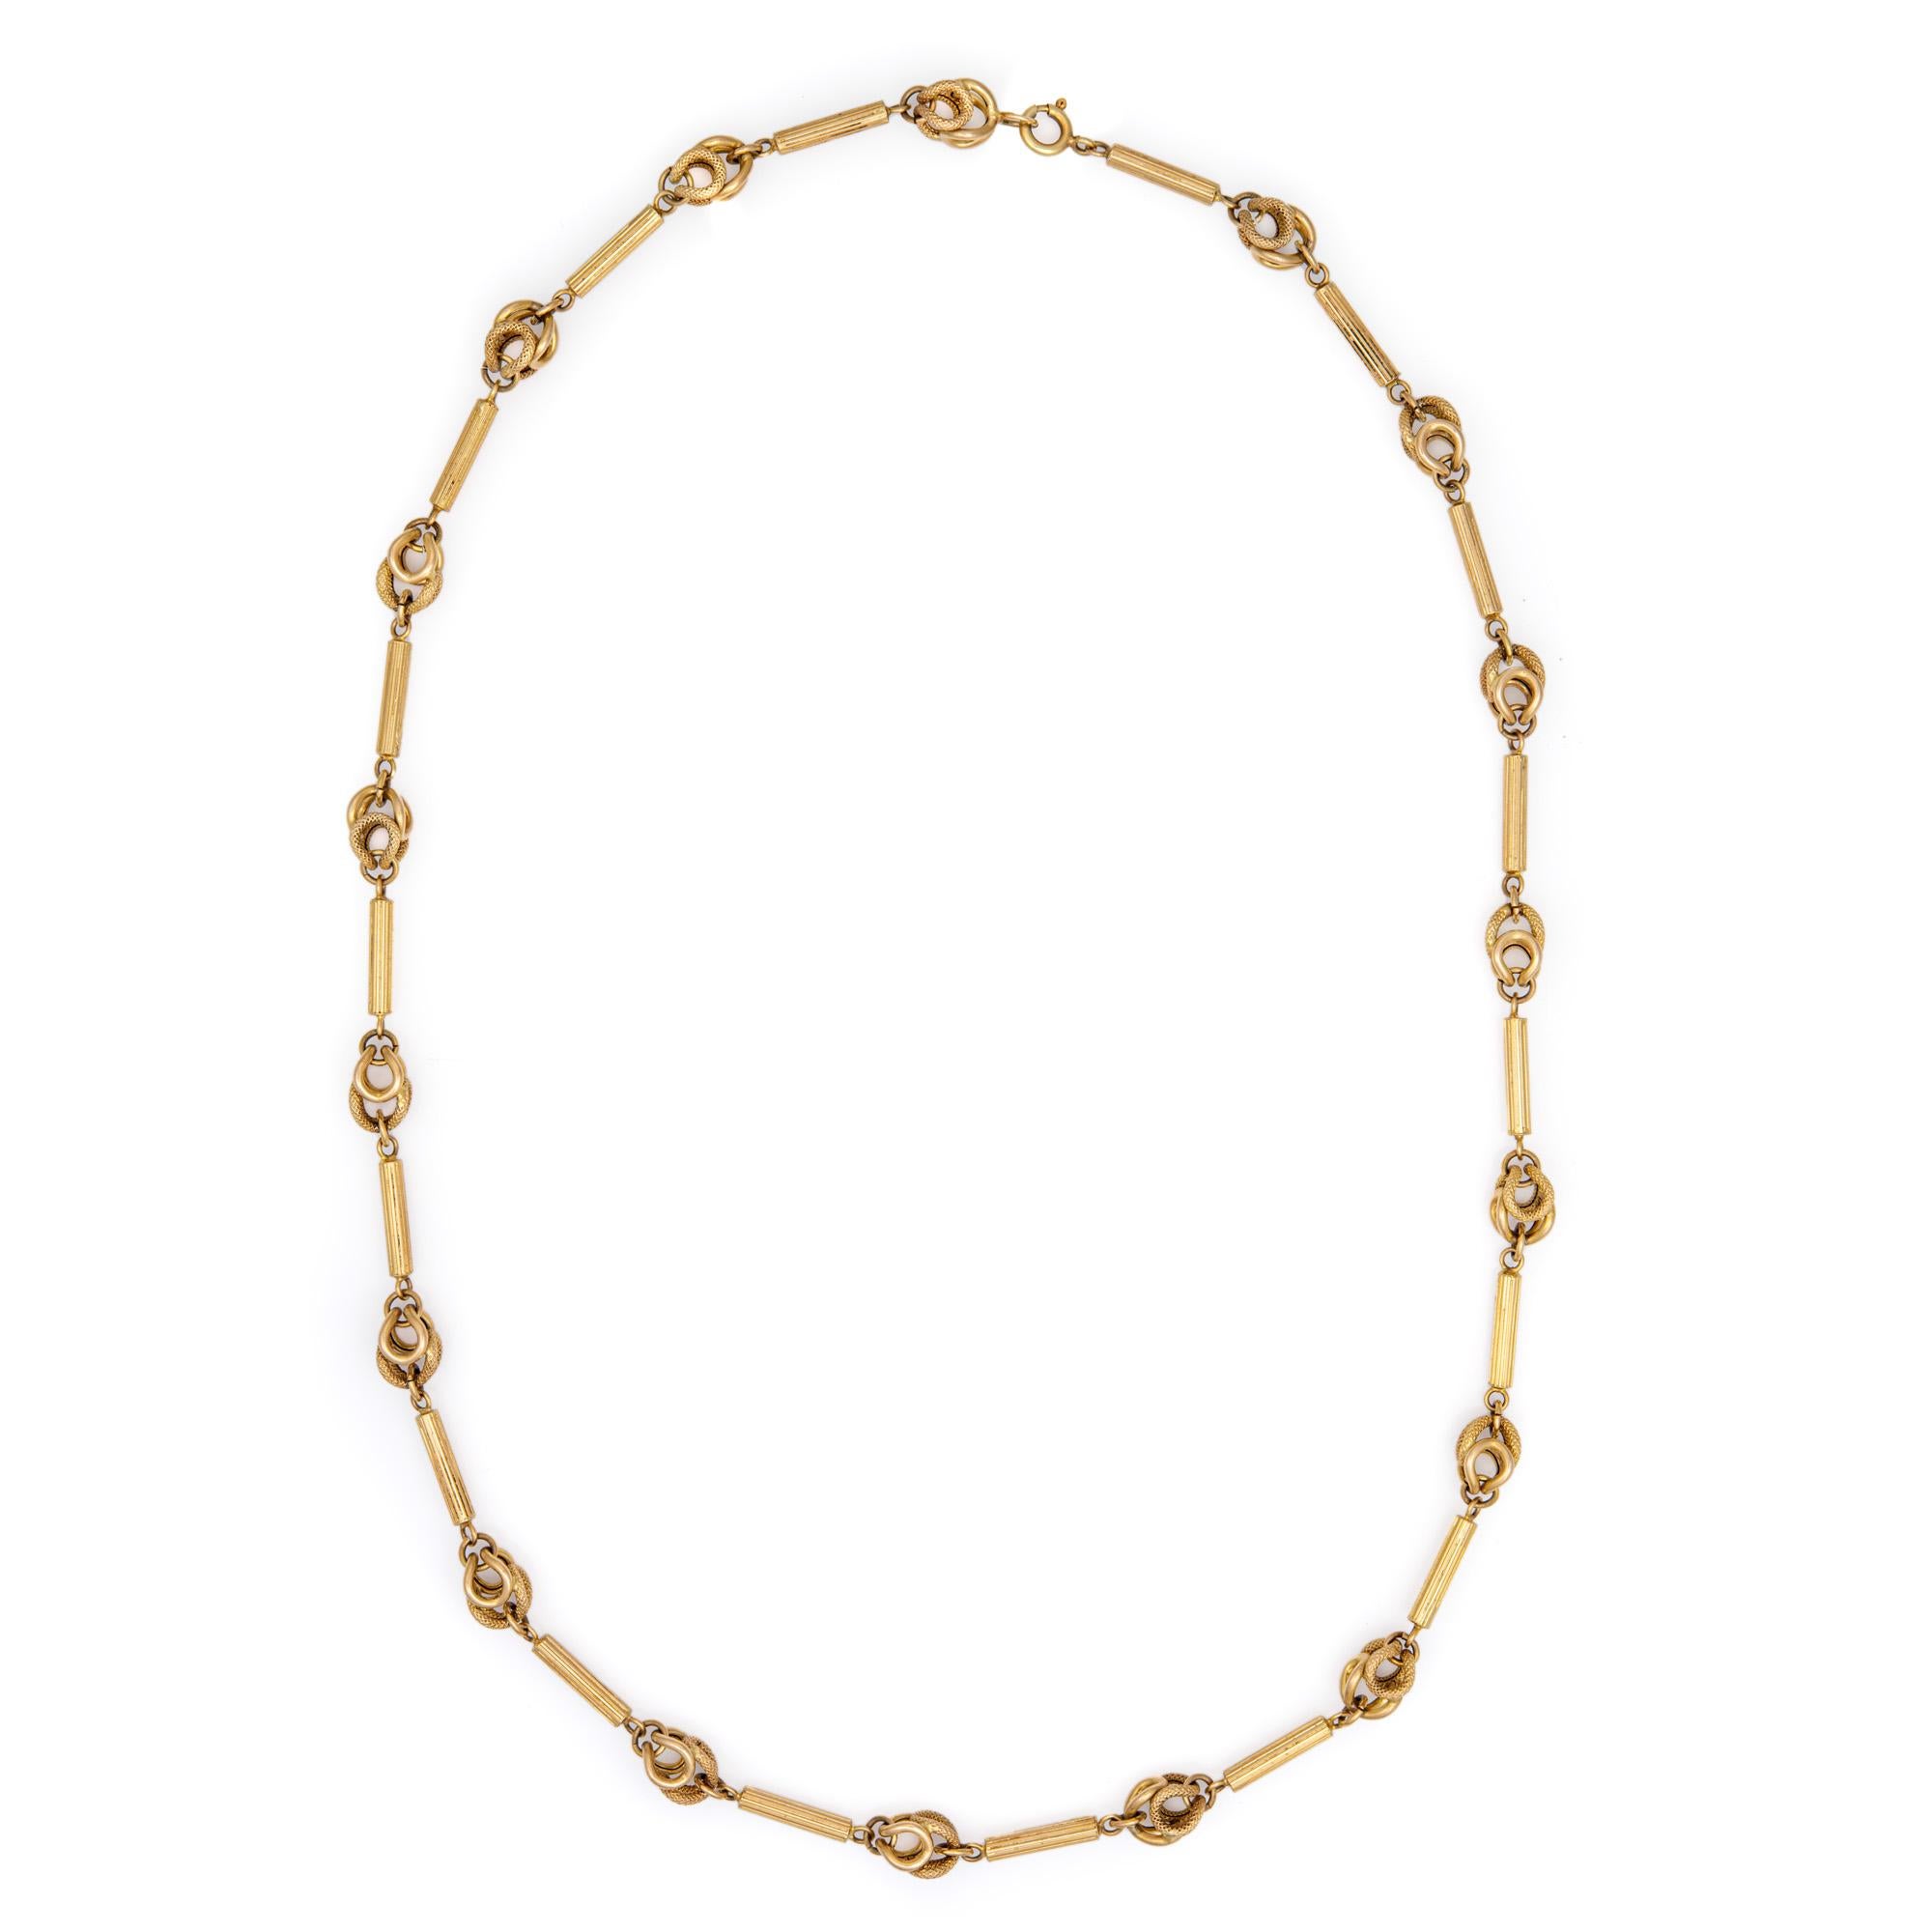 Finely detailed fancy link necklace crafted in 14 karat yellow gold (circa 1960s to 1970s). 

The stylish necklace features a scrolled design, closely joined together with high polished and textured gold links for maximum effect. The necklace weighs